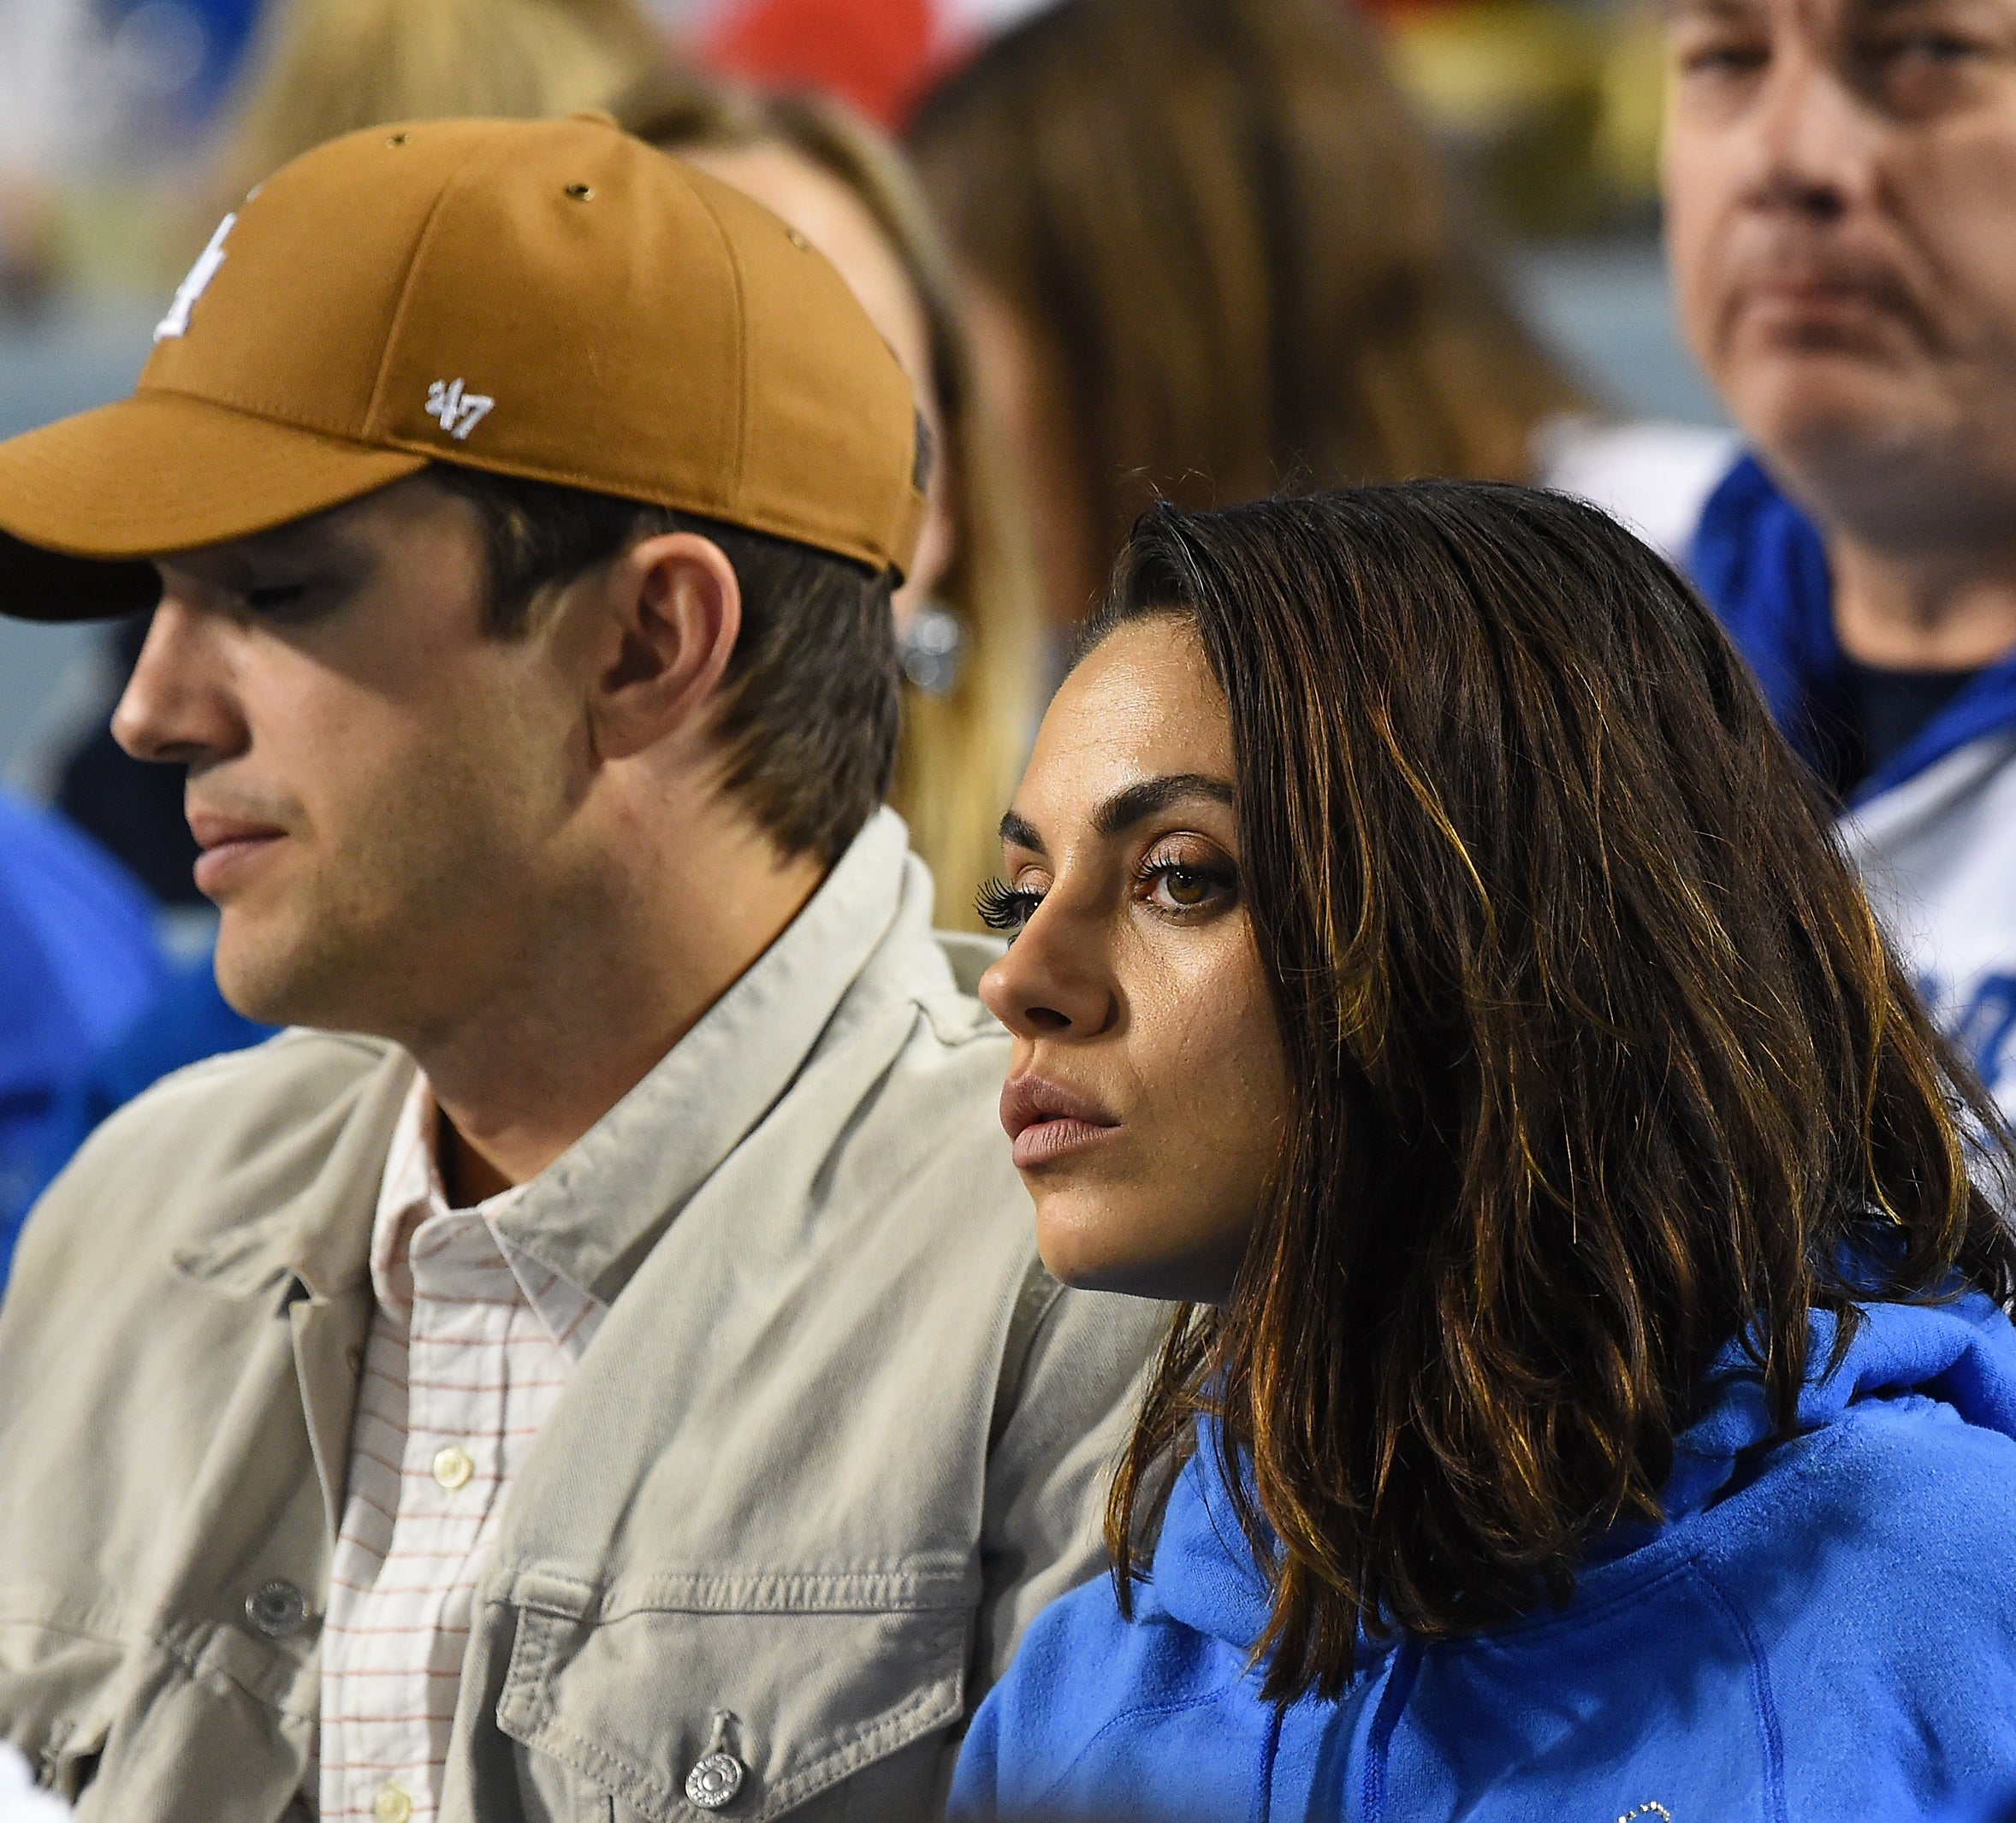 Close-up of Ashton and Mila sitting together